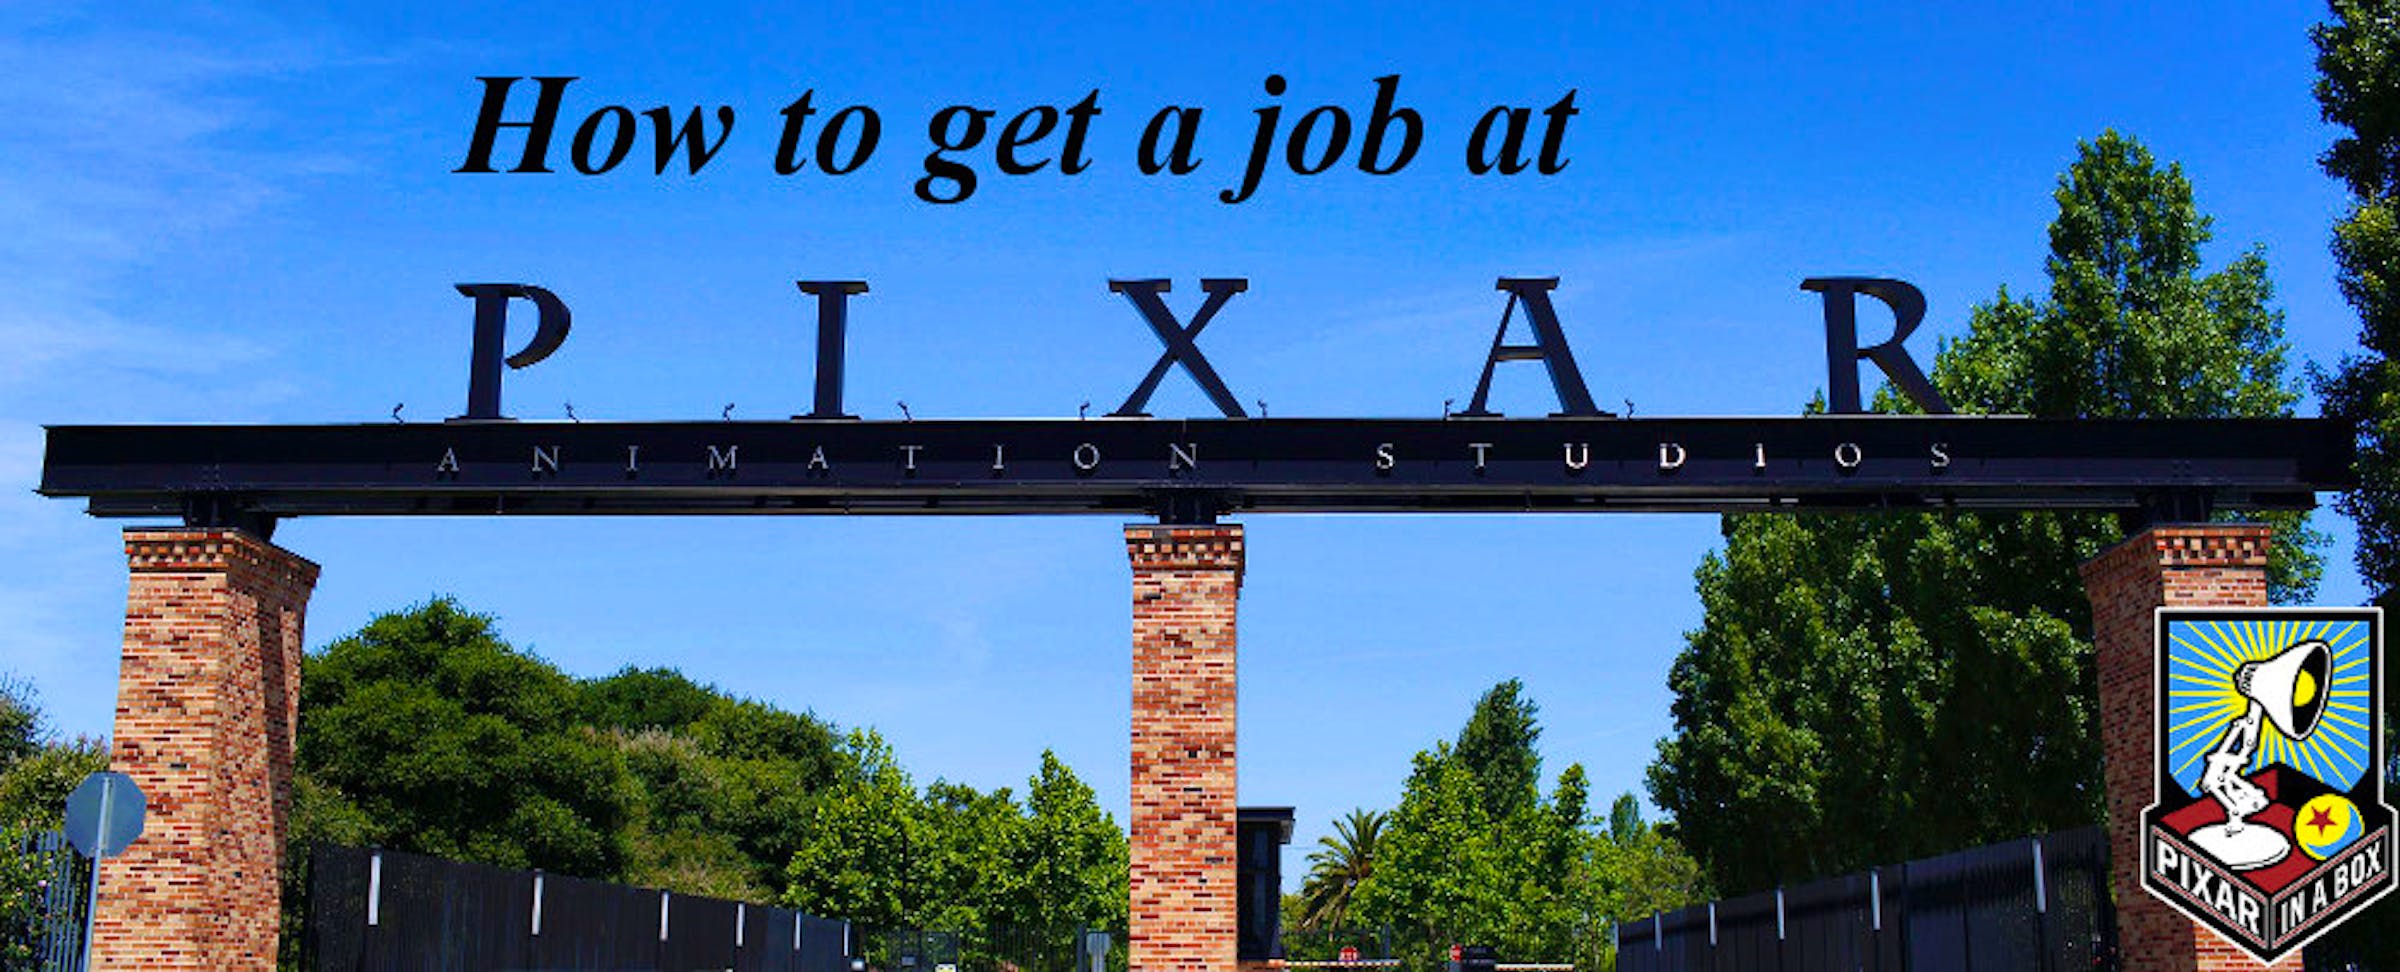 My cover letter to pixar